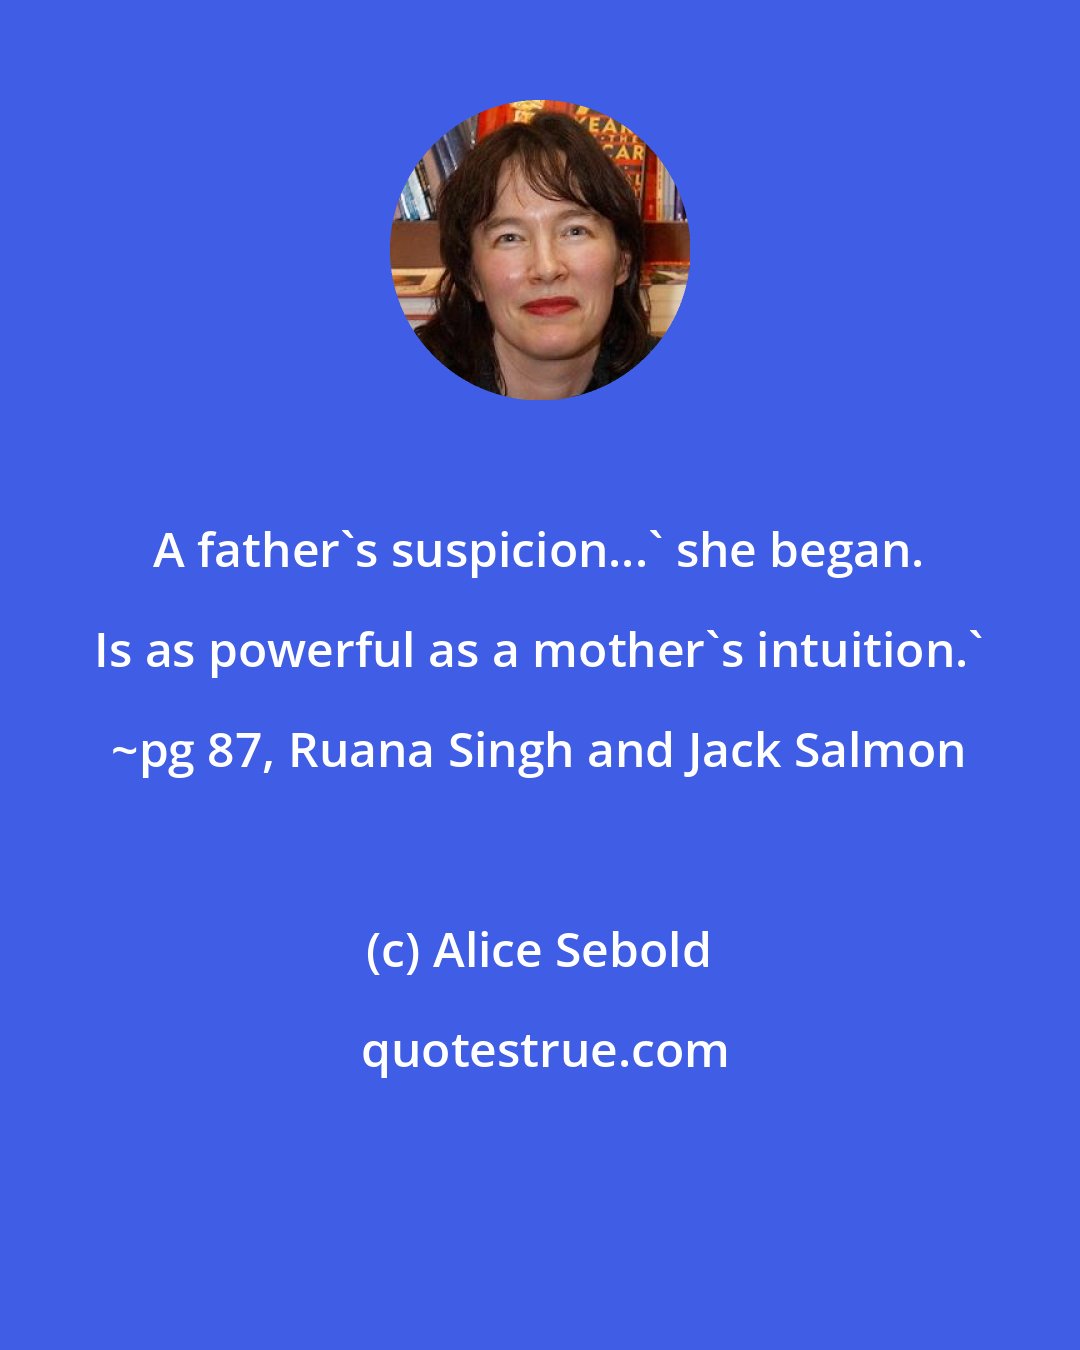 Alice Sebold: A father's suspicion...' she began. Is as powerful as a mother's intuition.' ~pg 87, Ruana Singh and Jack Salmon